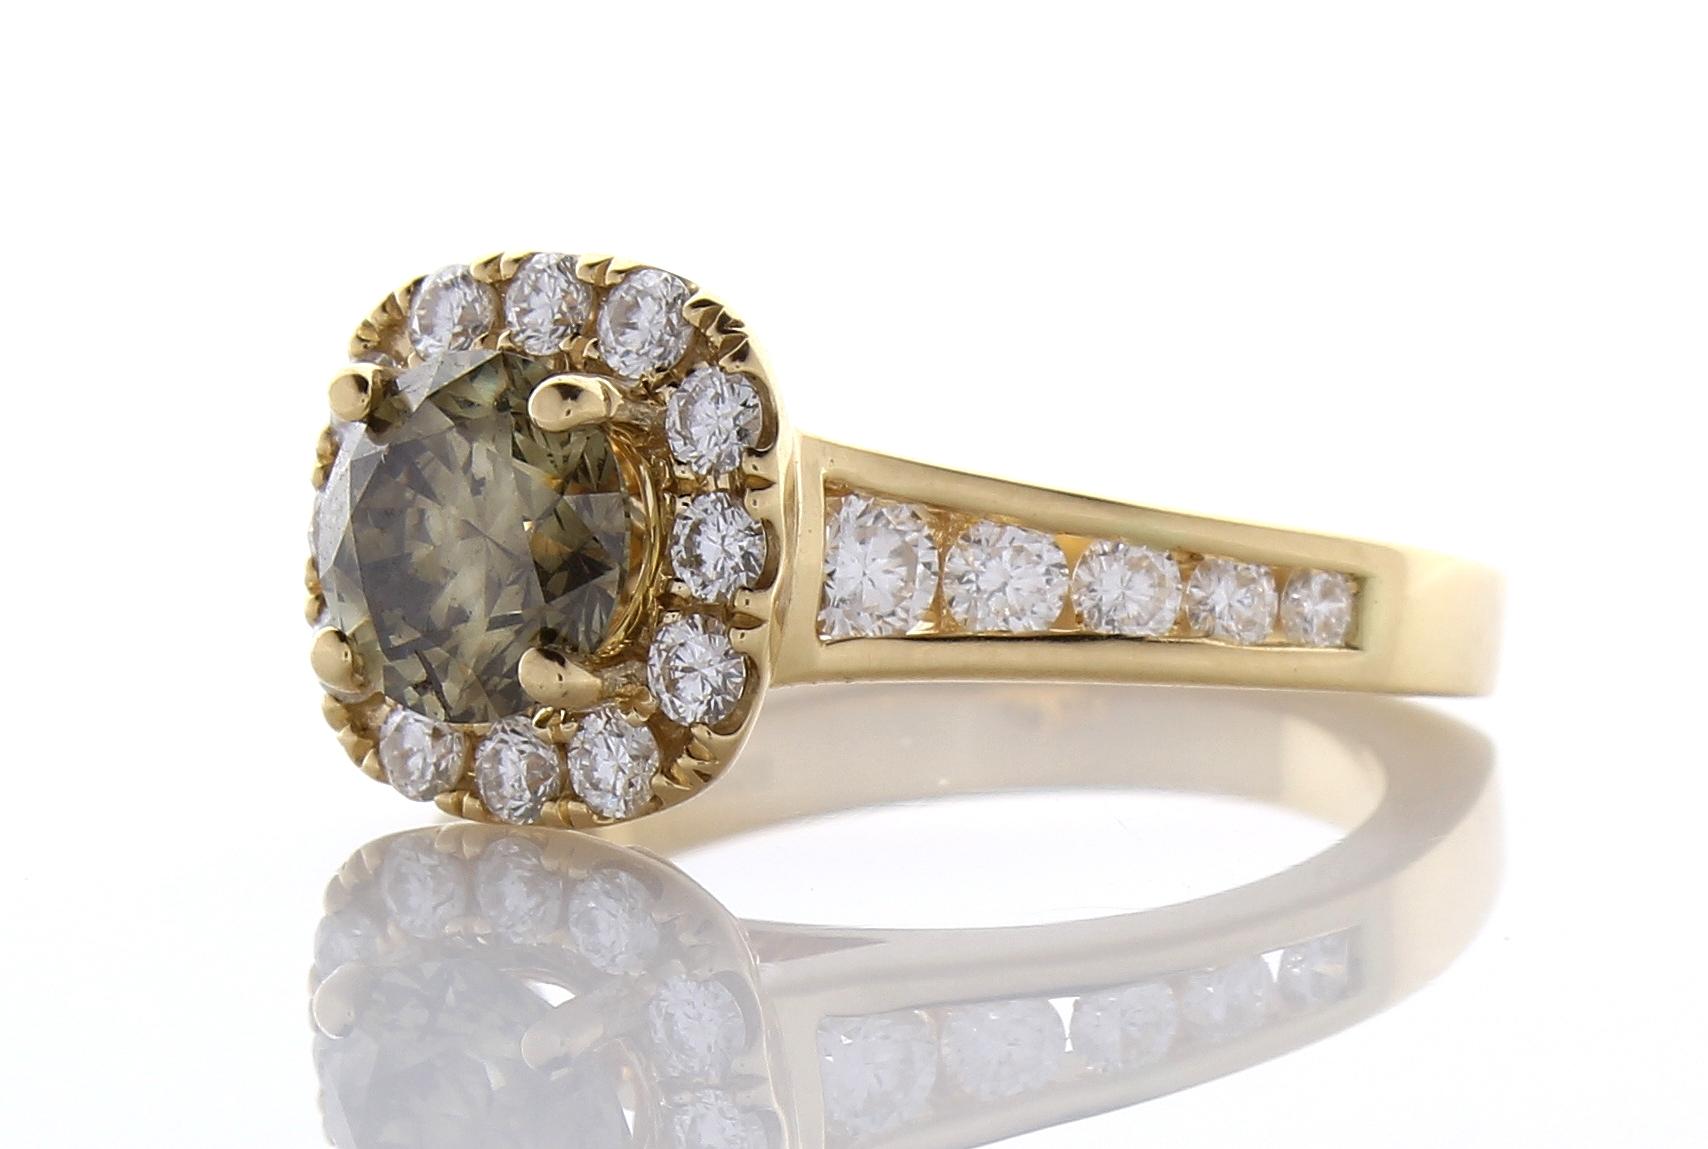 This incredible custom made halo engagement ring features a generous display of diamonds and color. One round brilliant cut fancy dark greenish-yellow-brown diamond is prong set in the center with a weight of 1.35 carats. This center stone is